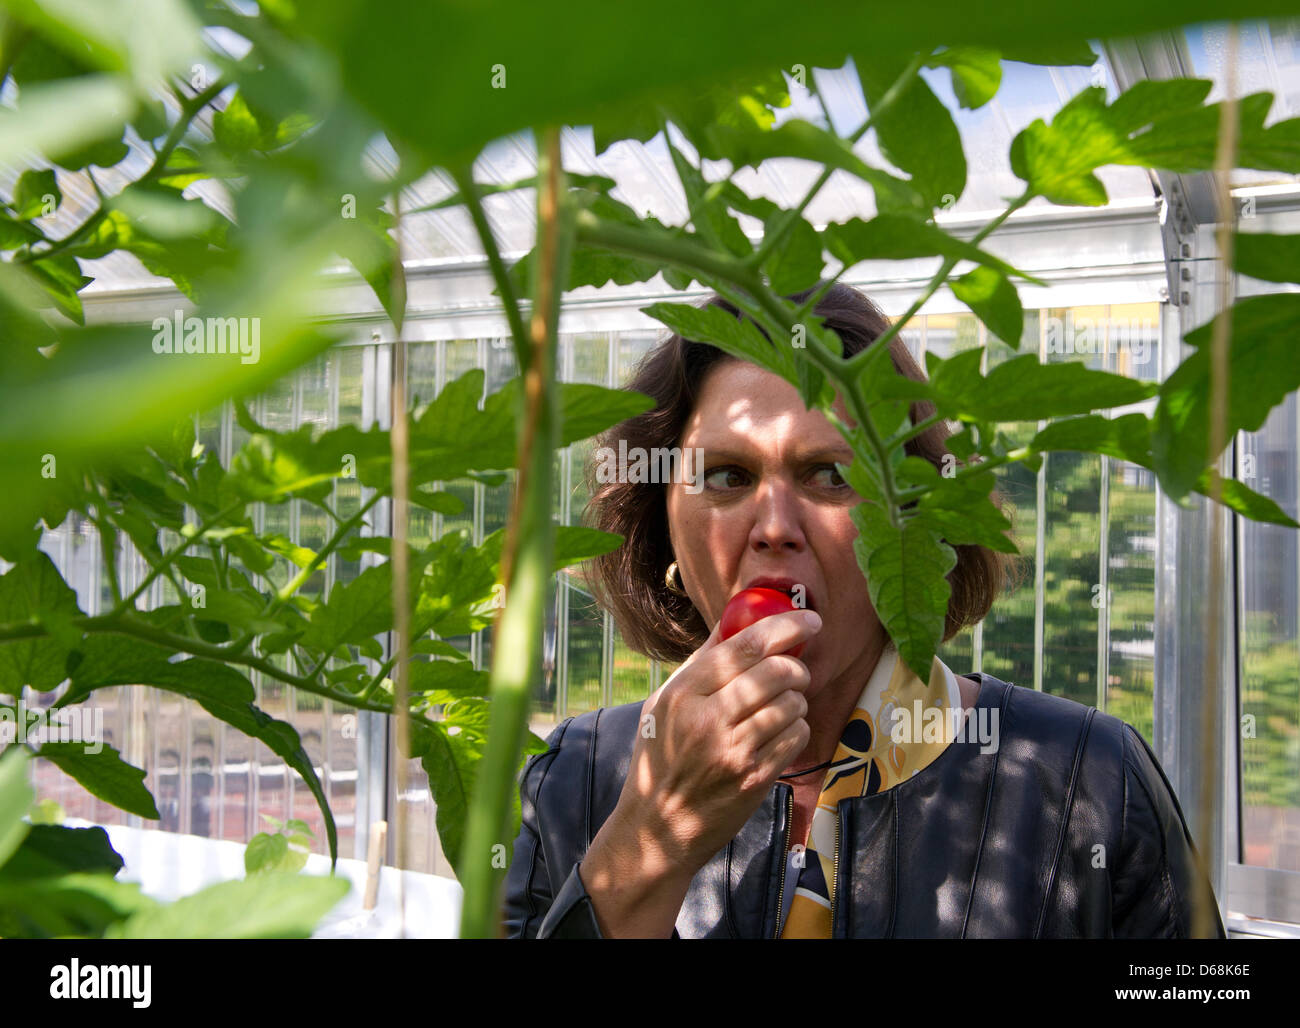 German Federal Agriculture Minister Ilse Aigner visits the company "Efficient City Farming" and eats a tomato in Berlin, Germany, 17 July 2012. The project includes around 700 hobby gardeners. Her visit took place as part of the press tour on the topic of urban farming. Photo: SOEREN STACHE Stock Photo